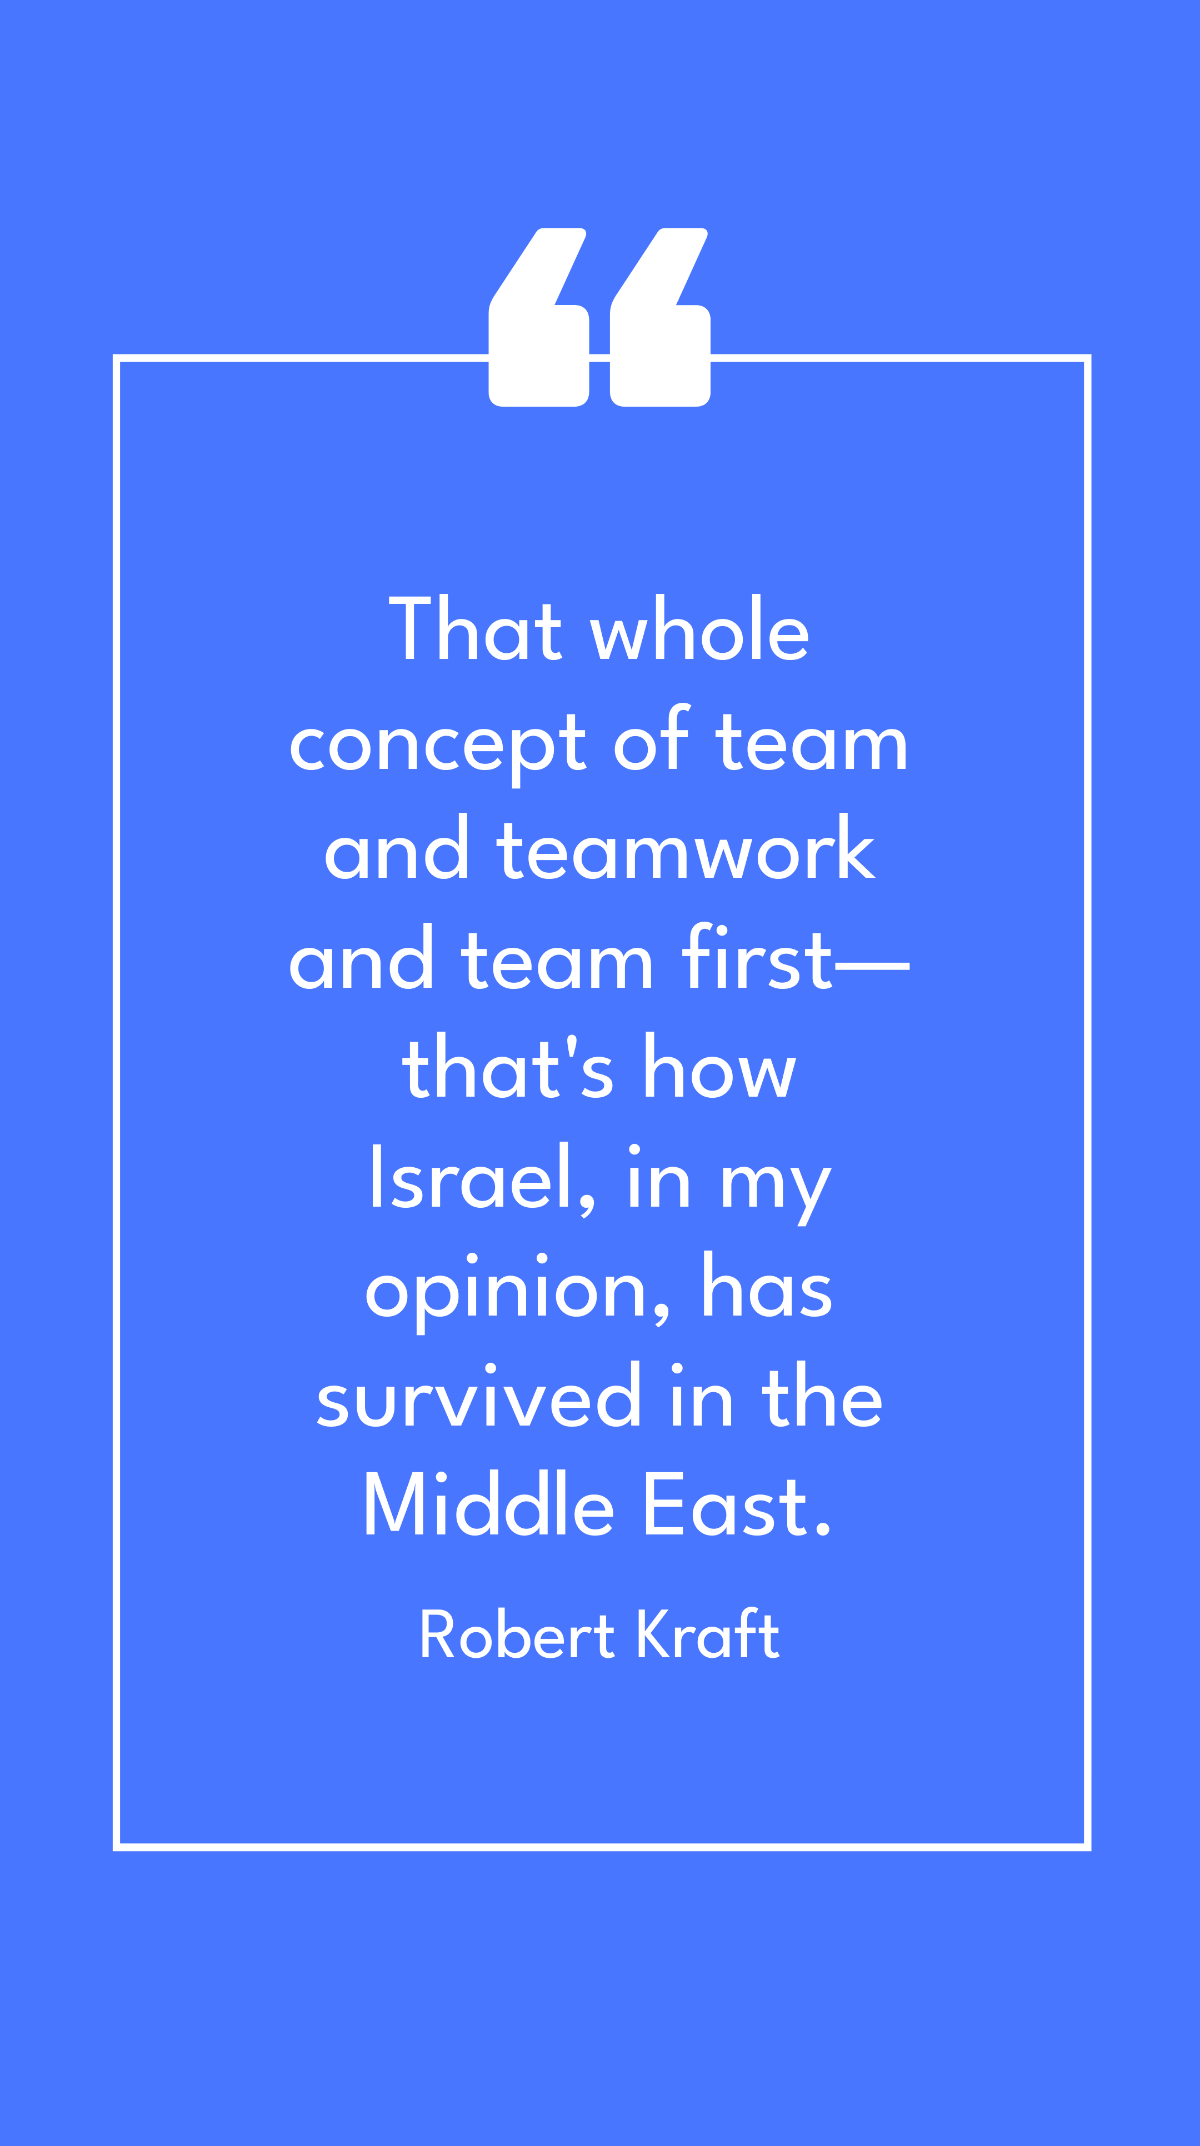 Robert Kraft - That whole concept of team and teamwork and team first - that's how Israel, in my opinion, has survived in the Middle East. Template